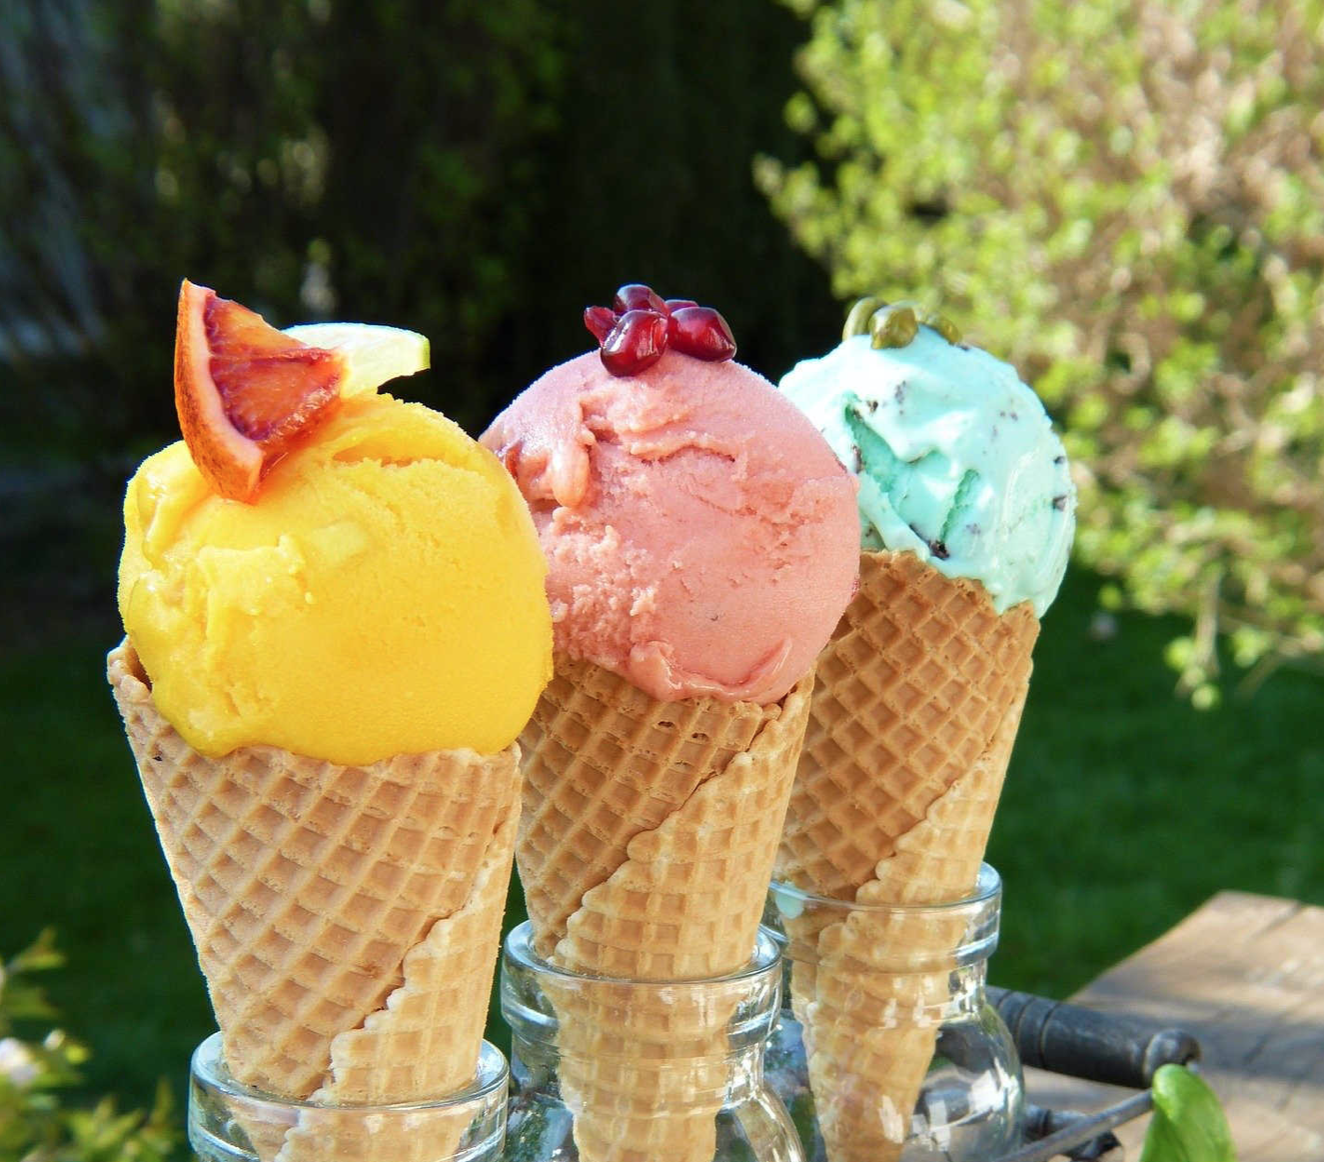 Where to get an ice cream near Pendle Hill